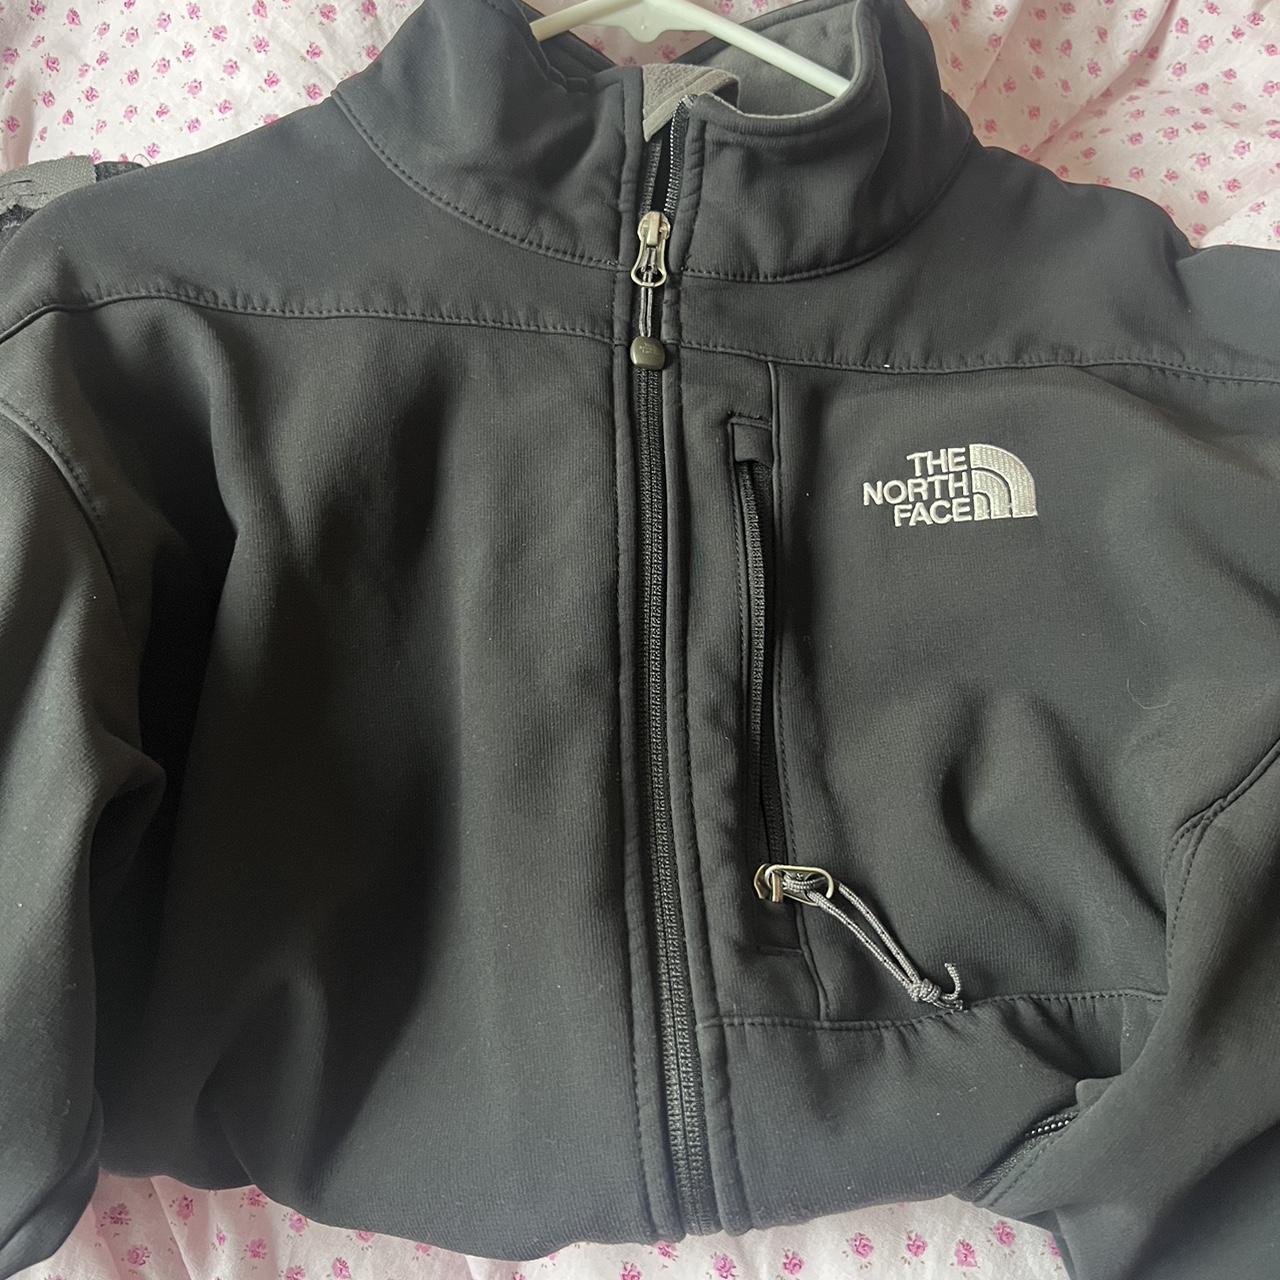 North face jacket this is fleece lined north face... - Depop